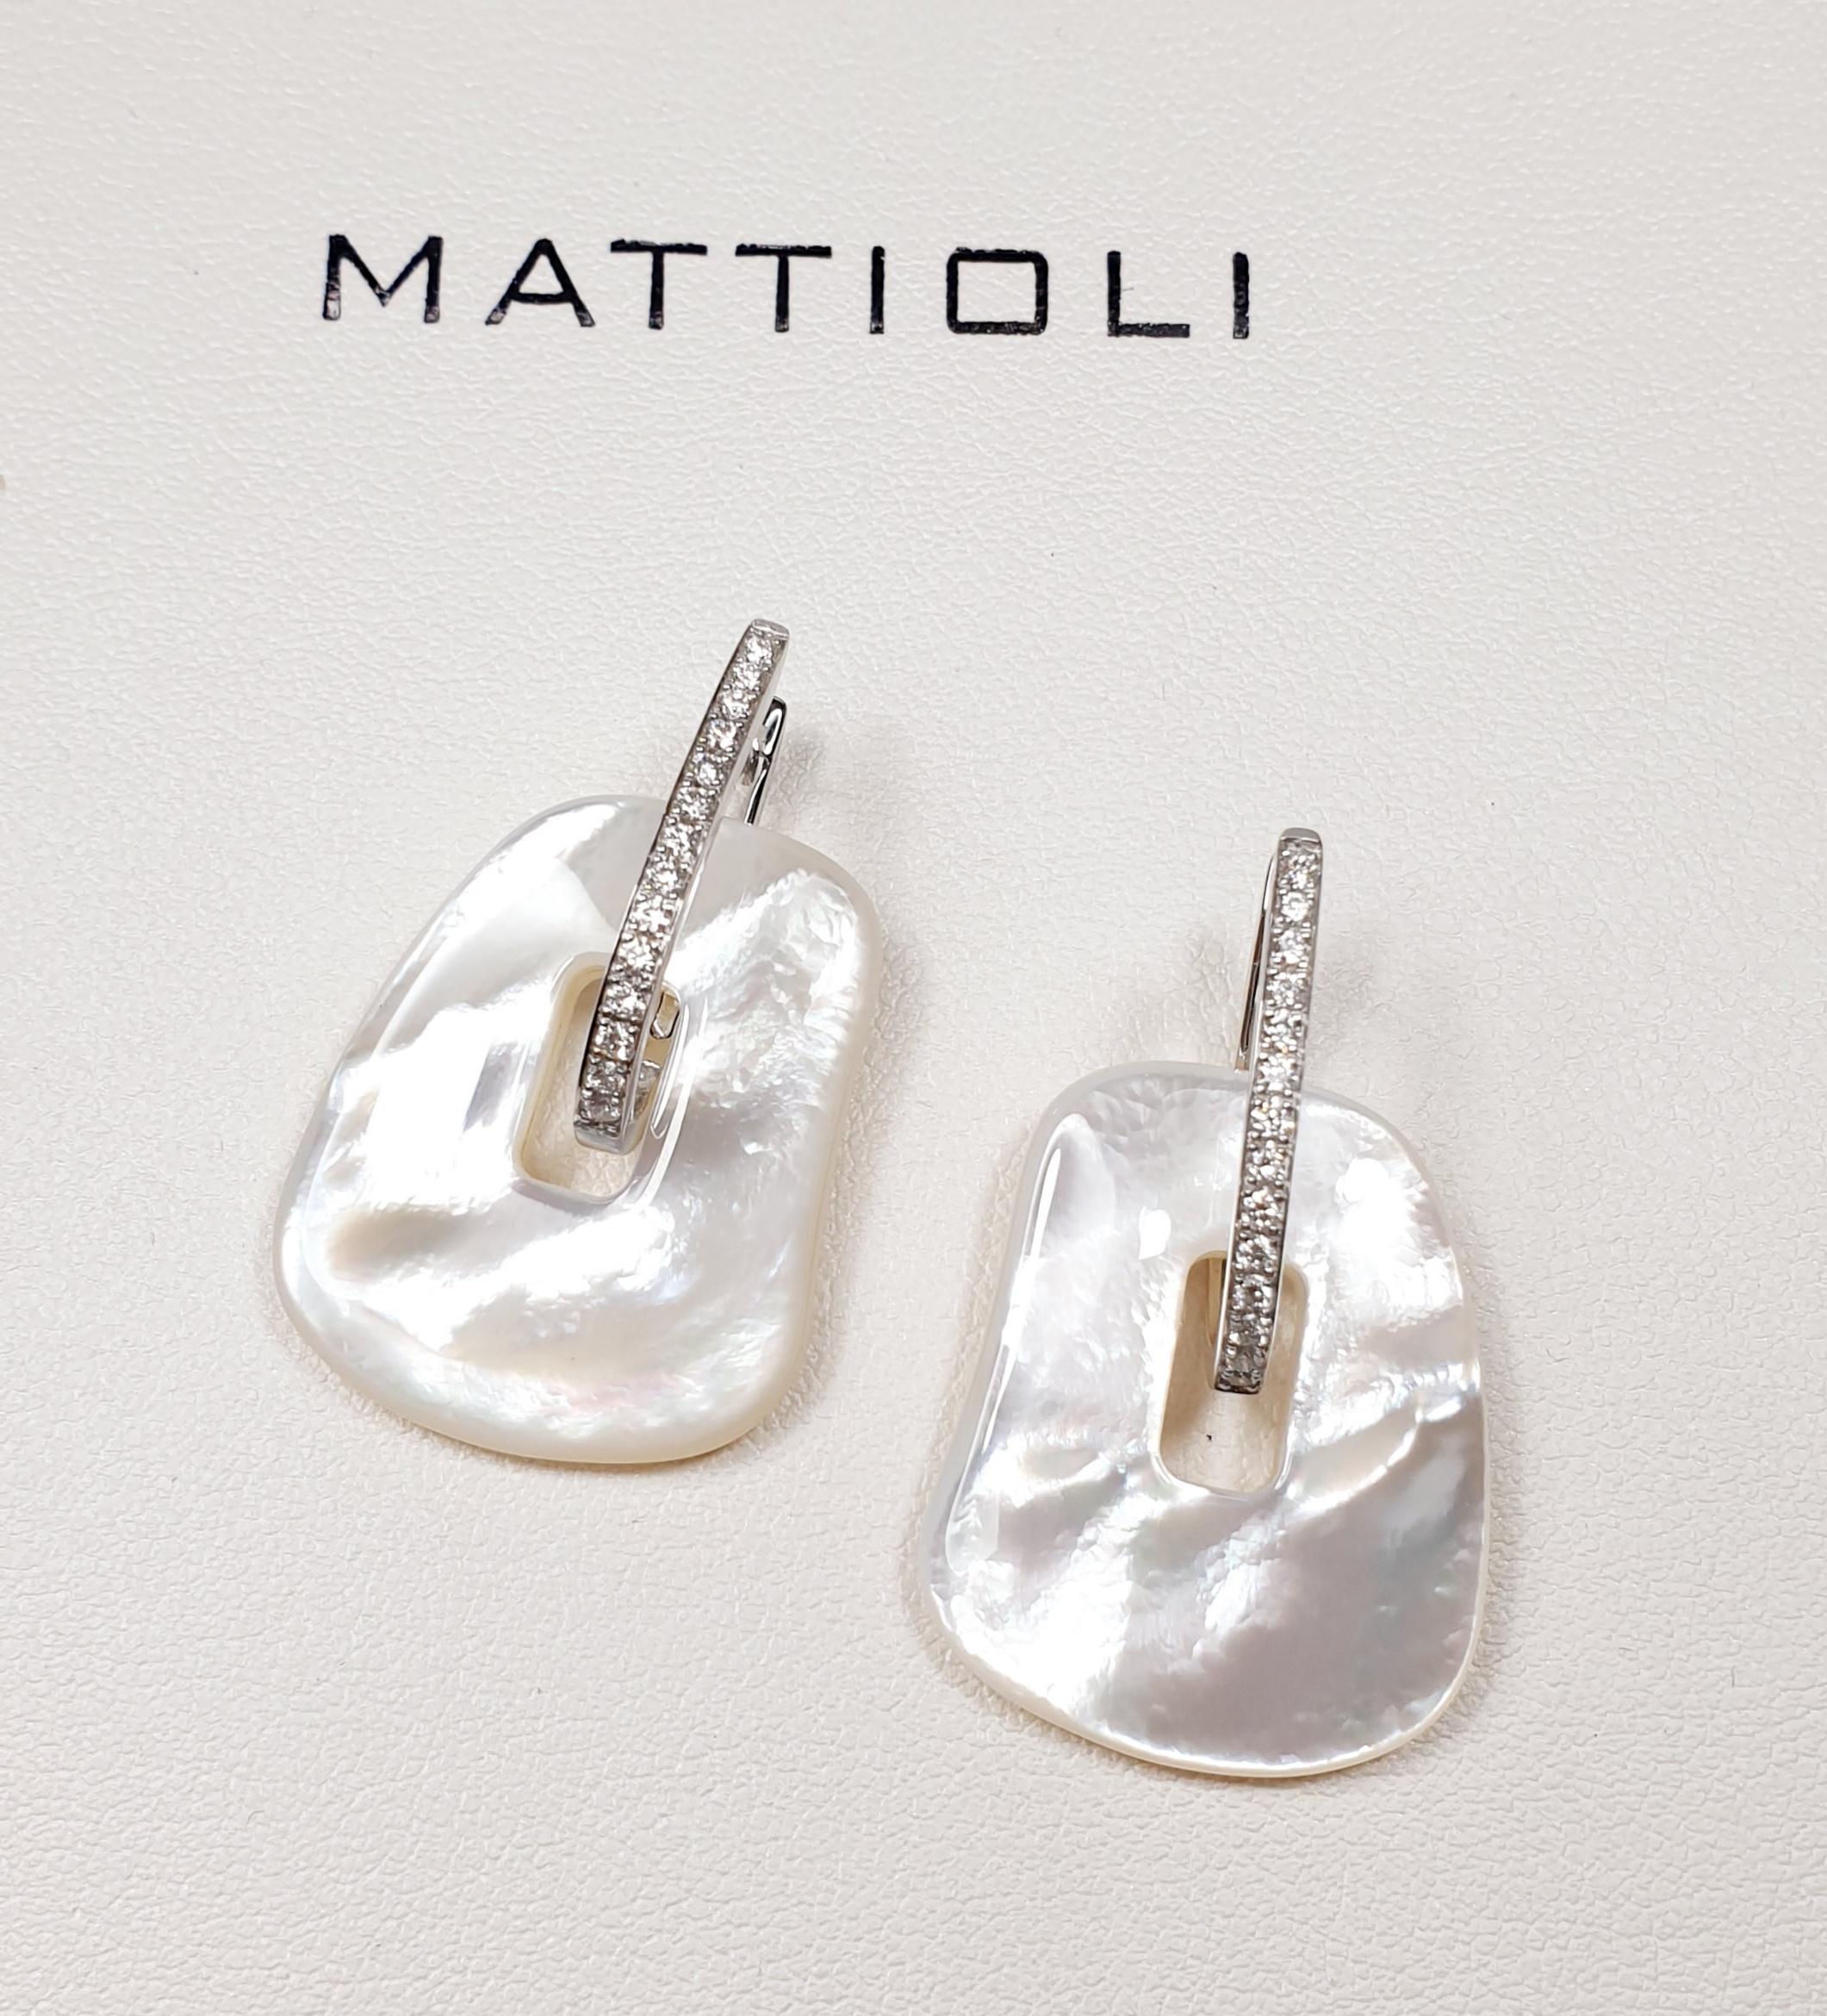 Mattioli Puzzle Earrings 18Kt White Gold & Diamonds 11 Colored Pairs Medium Size In New Condition For Sale In Bilbao, ES